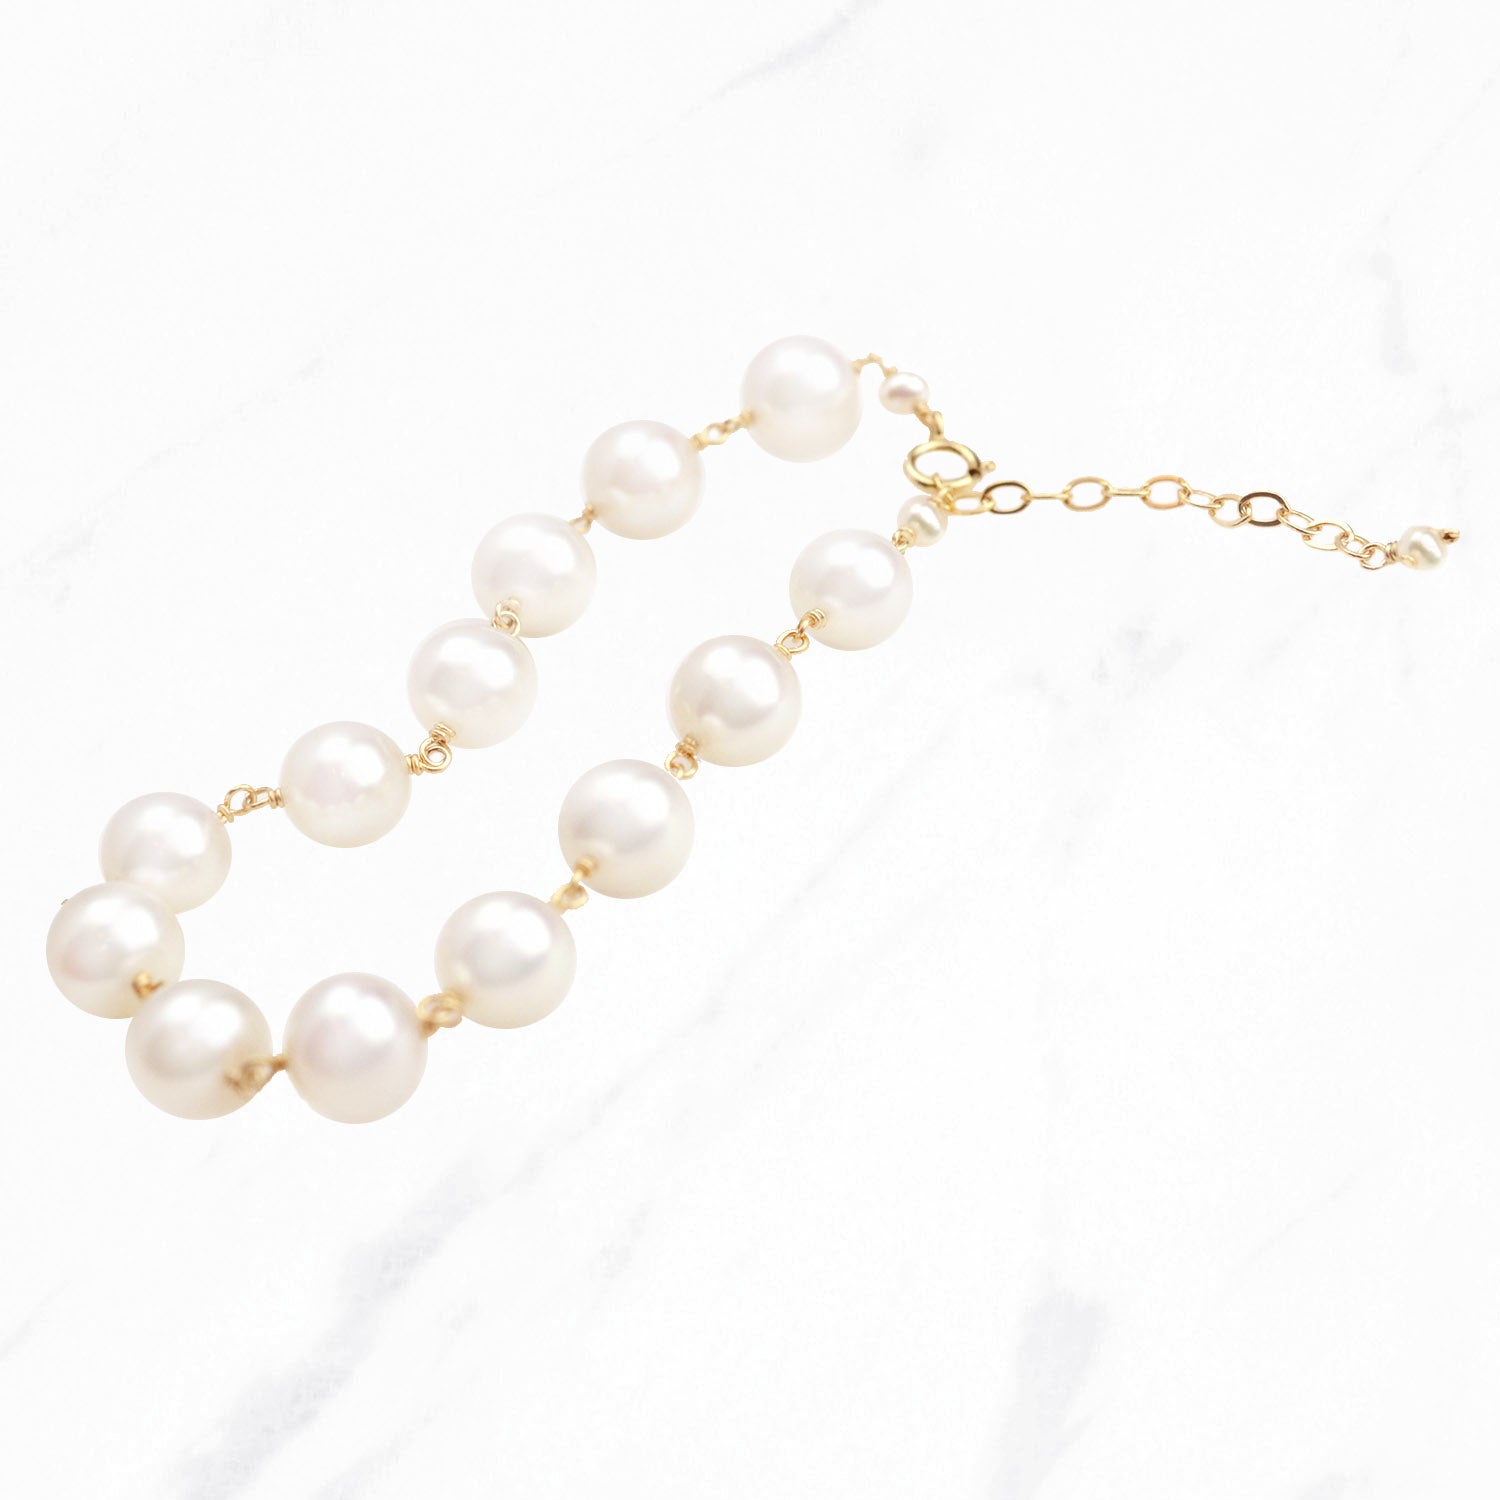 7mm Pearl Toggle Clasp Bracelet